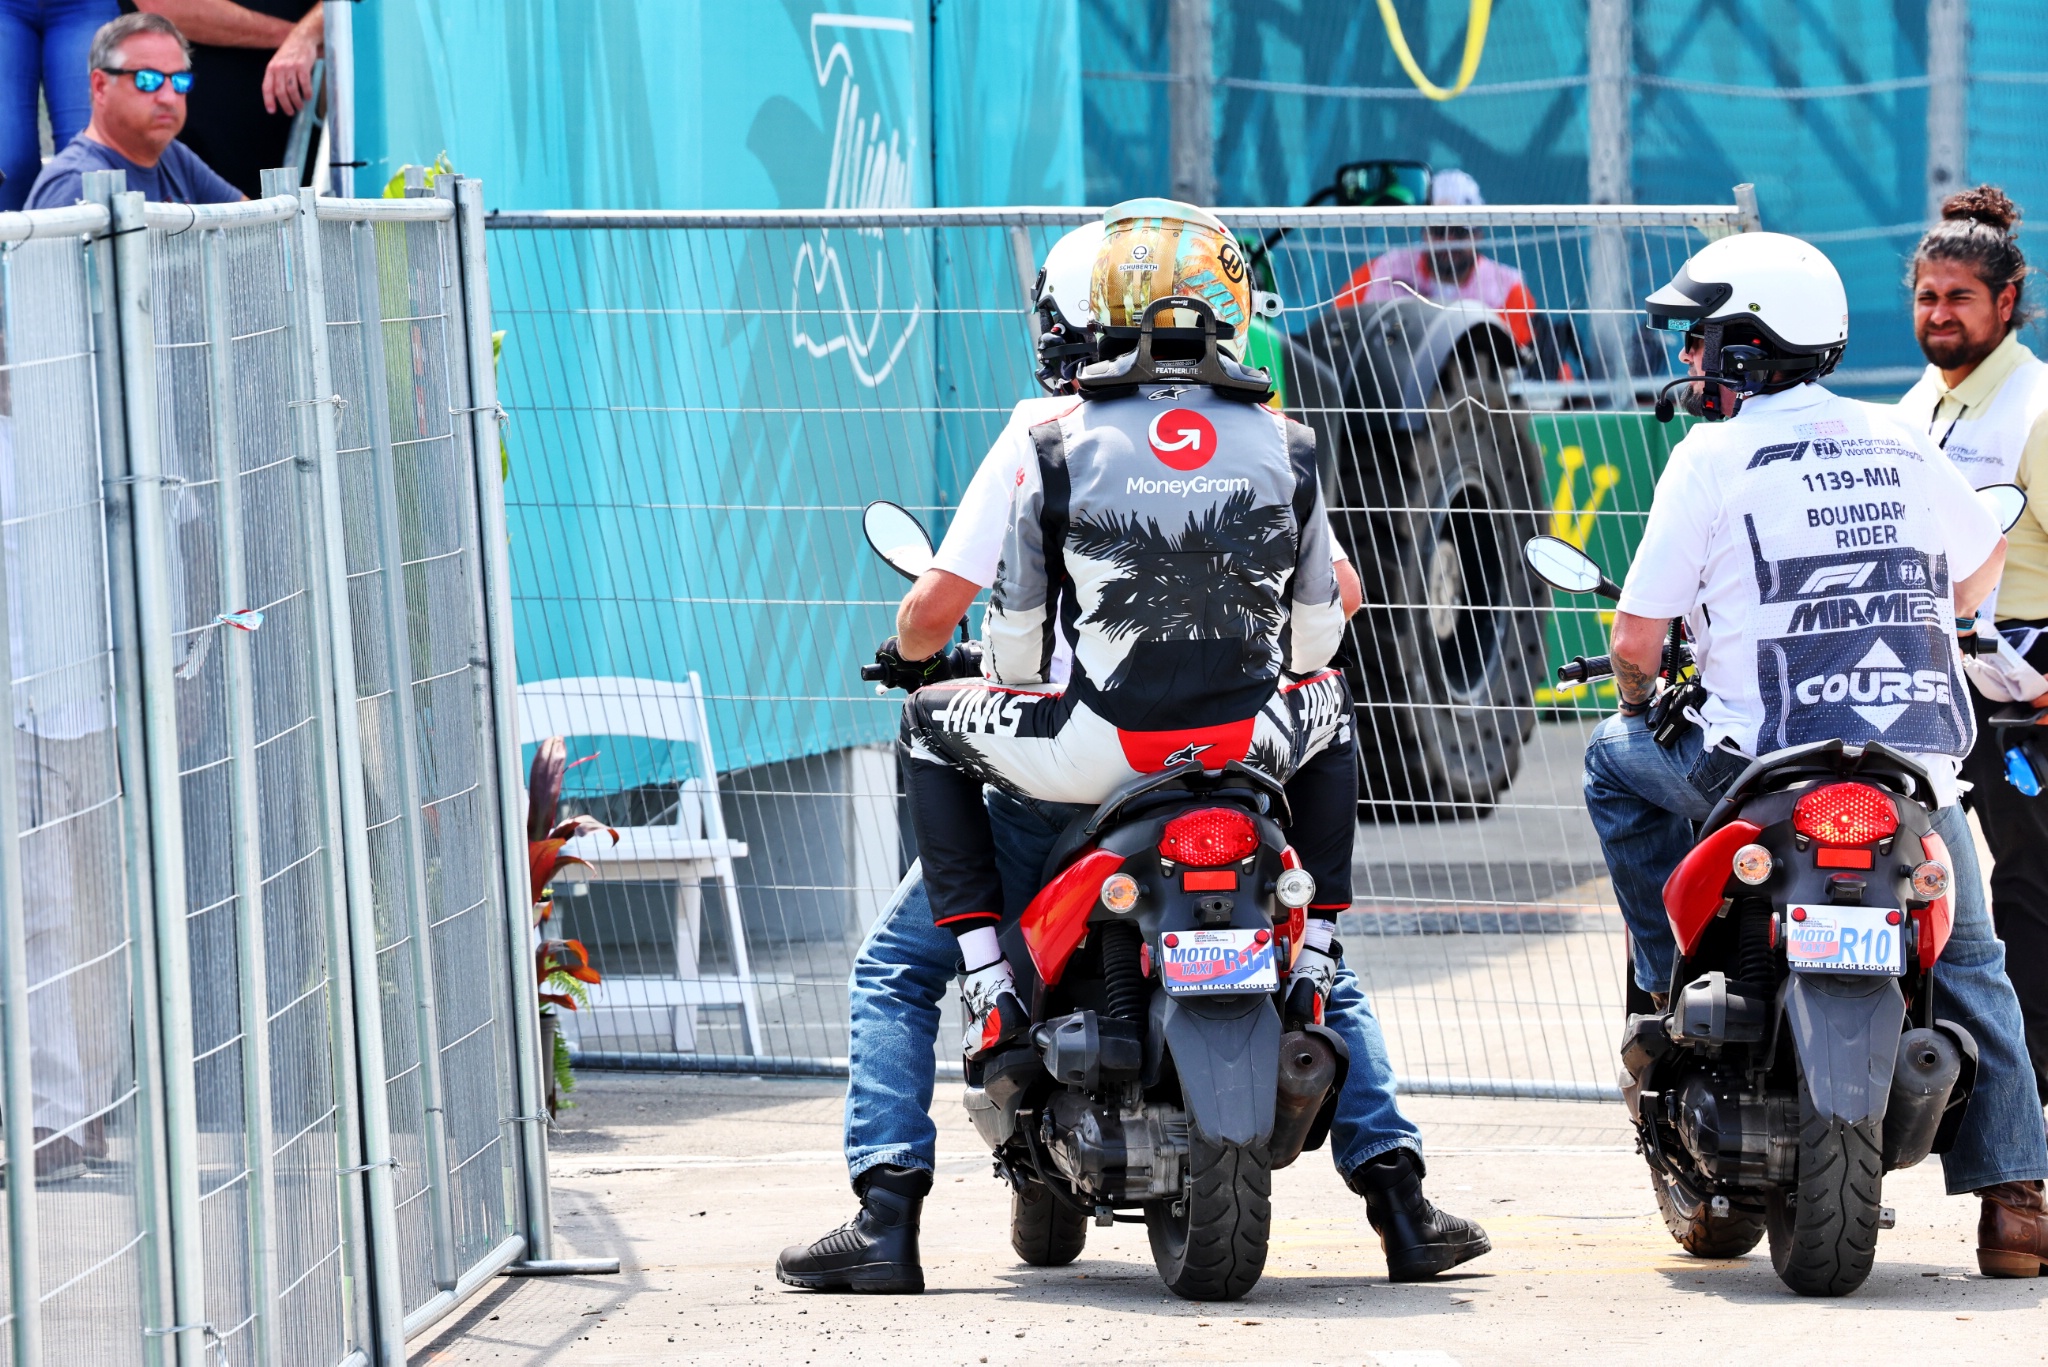 Nico Hulkenberg (GER) Haas F1 Team returns to the pits on a back of a scooter after crashing in the first practice